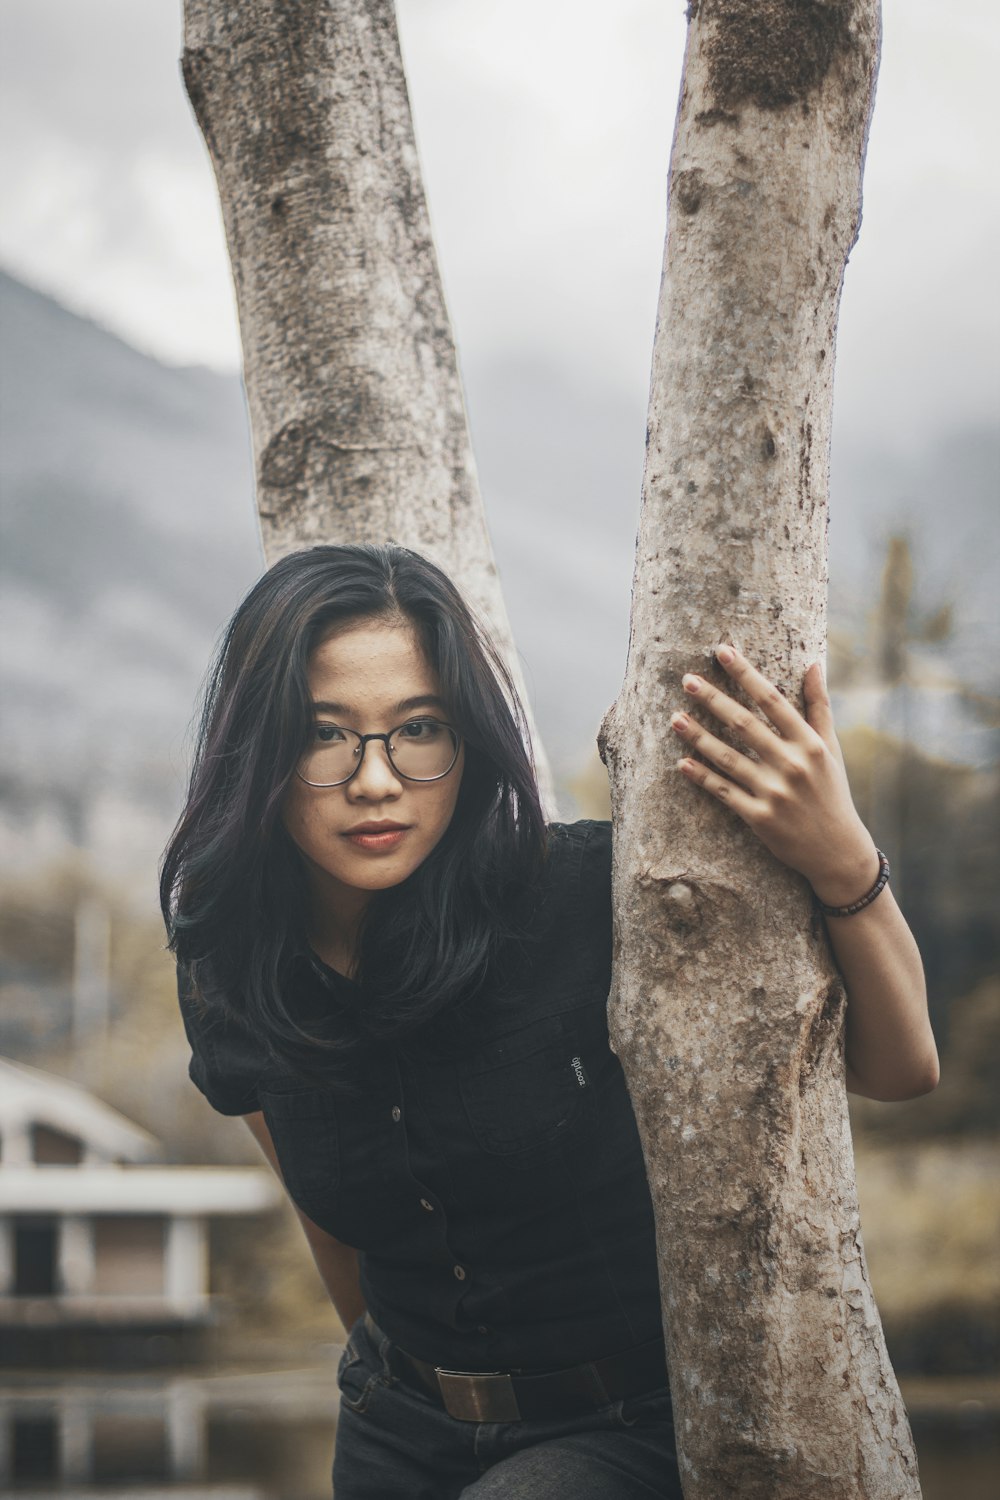 a woman wearing glasses leaning against a tree